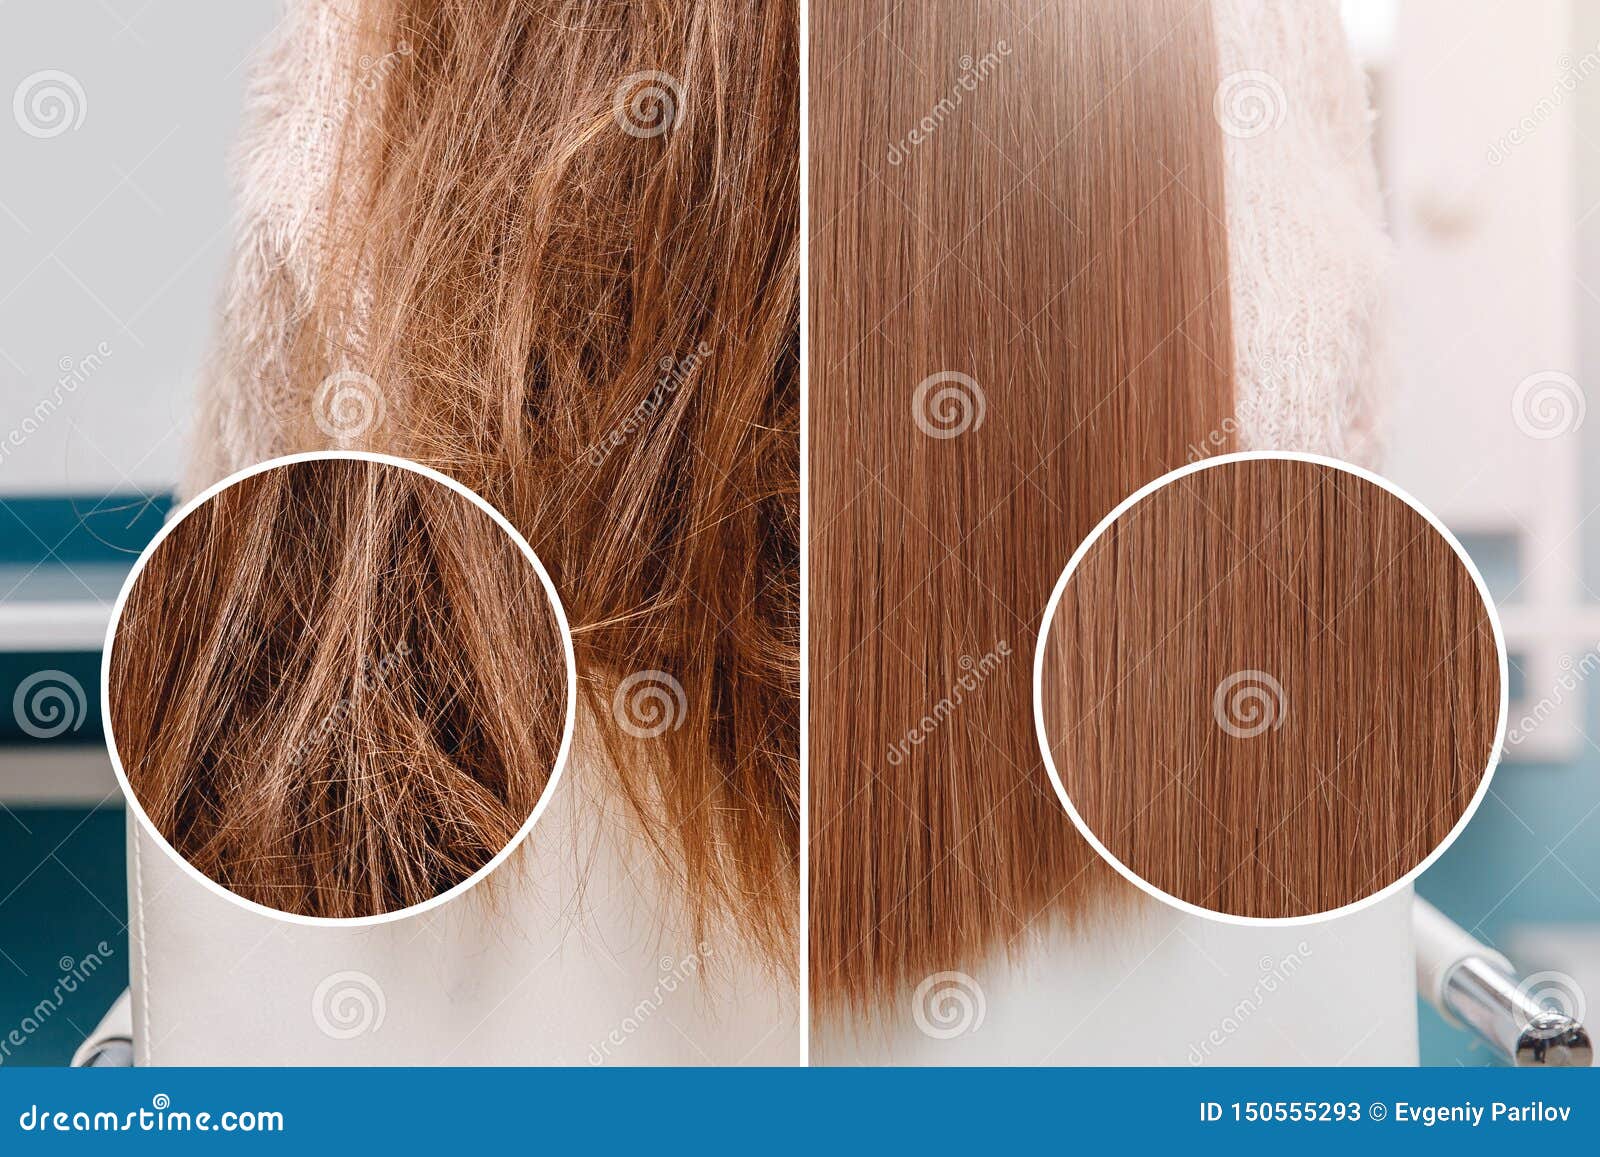 Sick, Cut and Healthy Hair Care Straightening. before and after Treatment  Stock Image - Image of back, beauty: 150555293